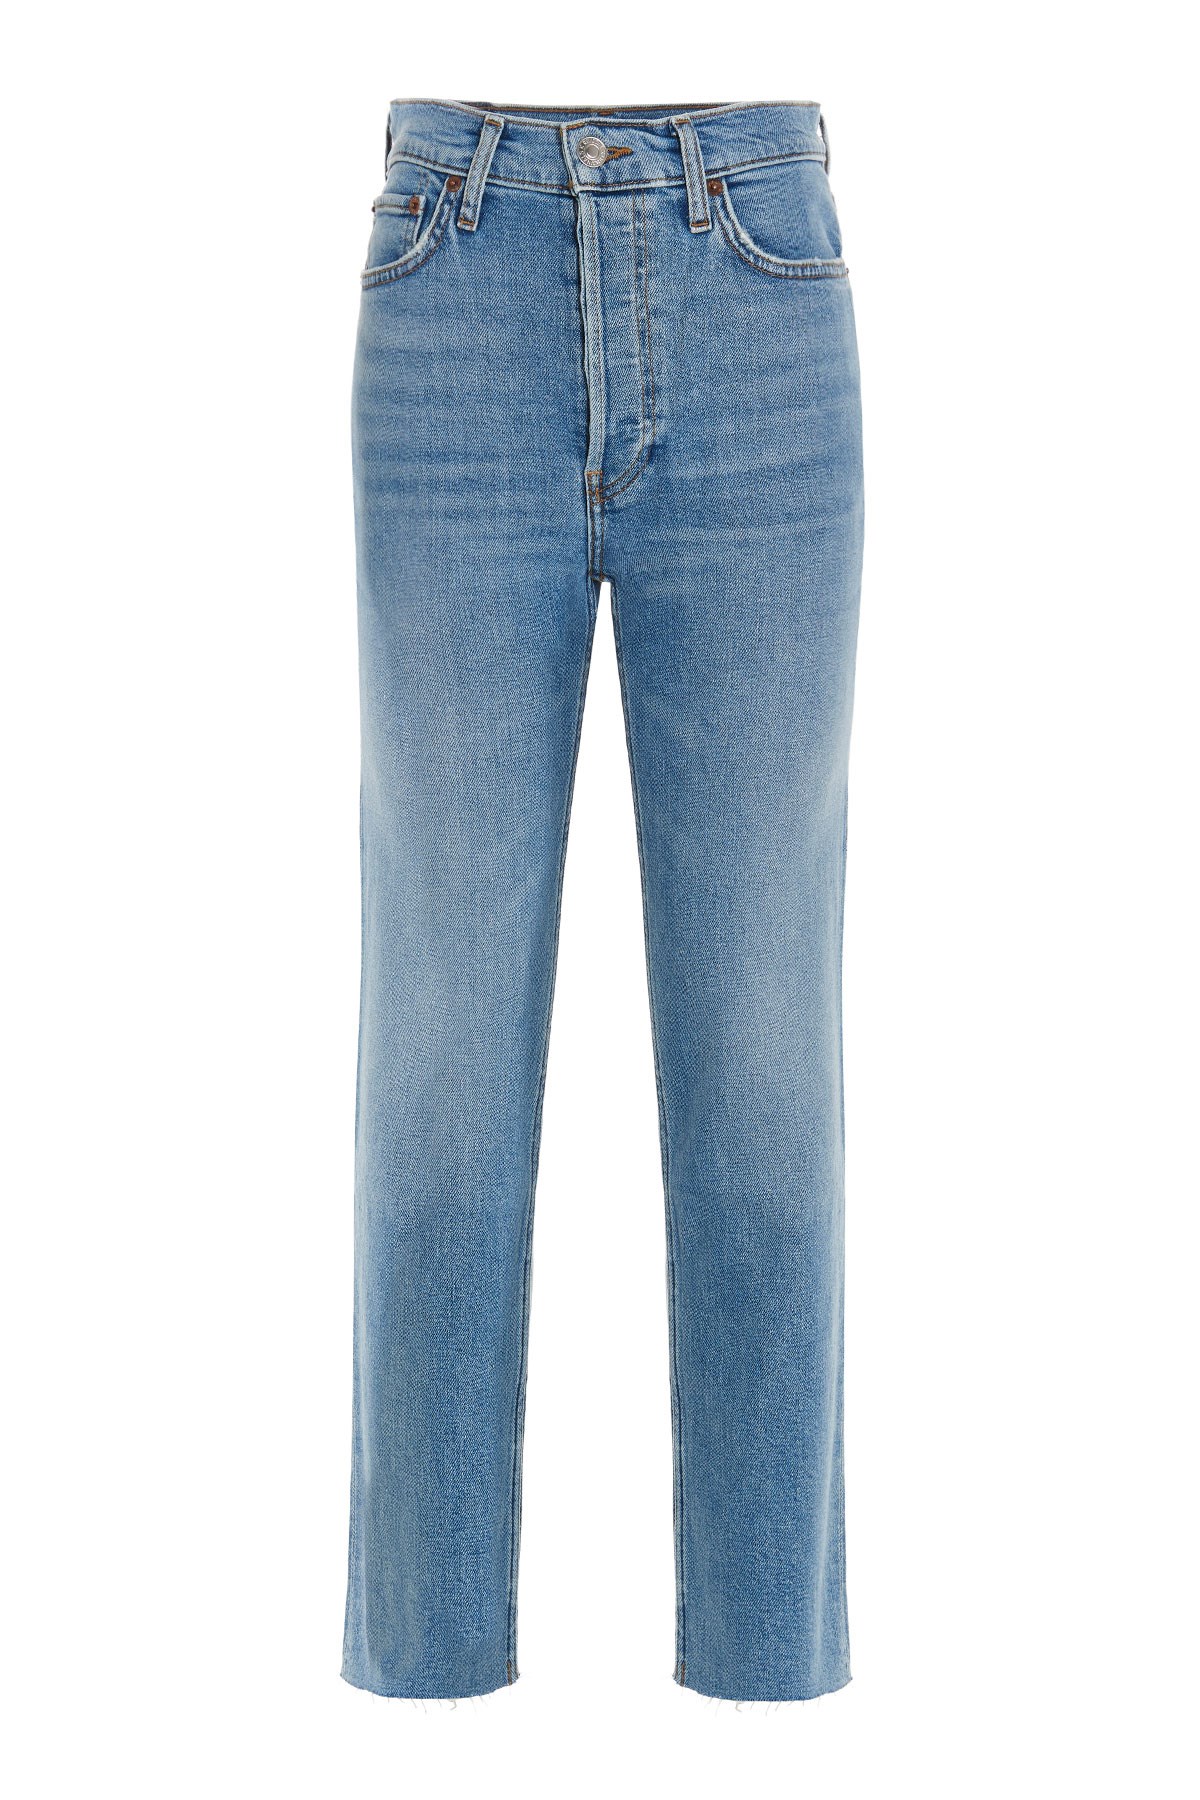 RE/DONE '70S Stove Pipe’ Jeans